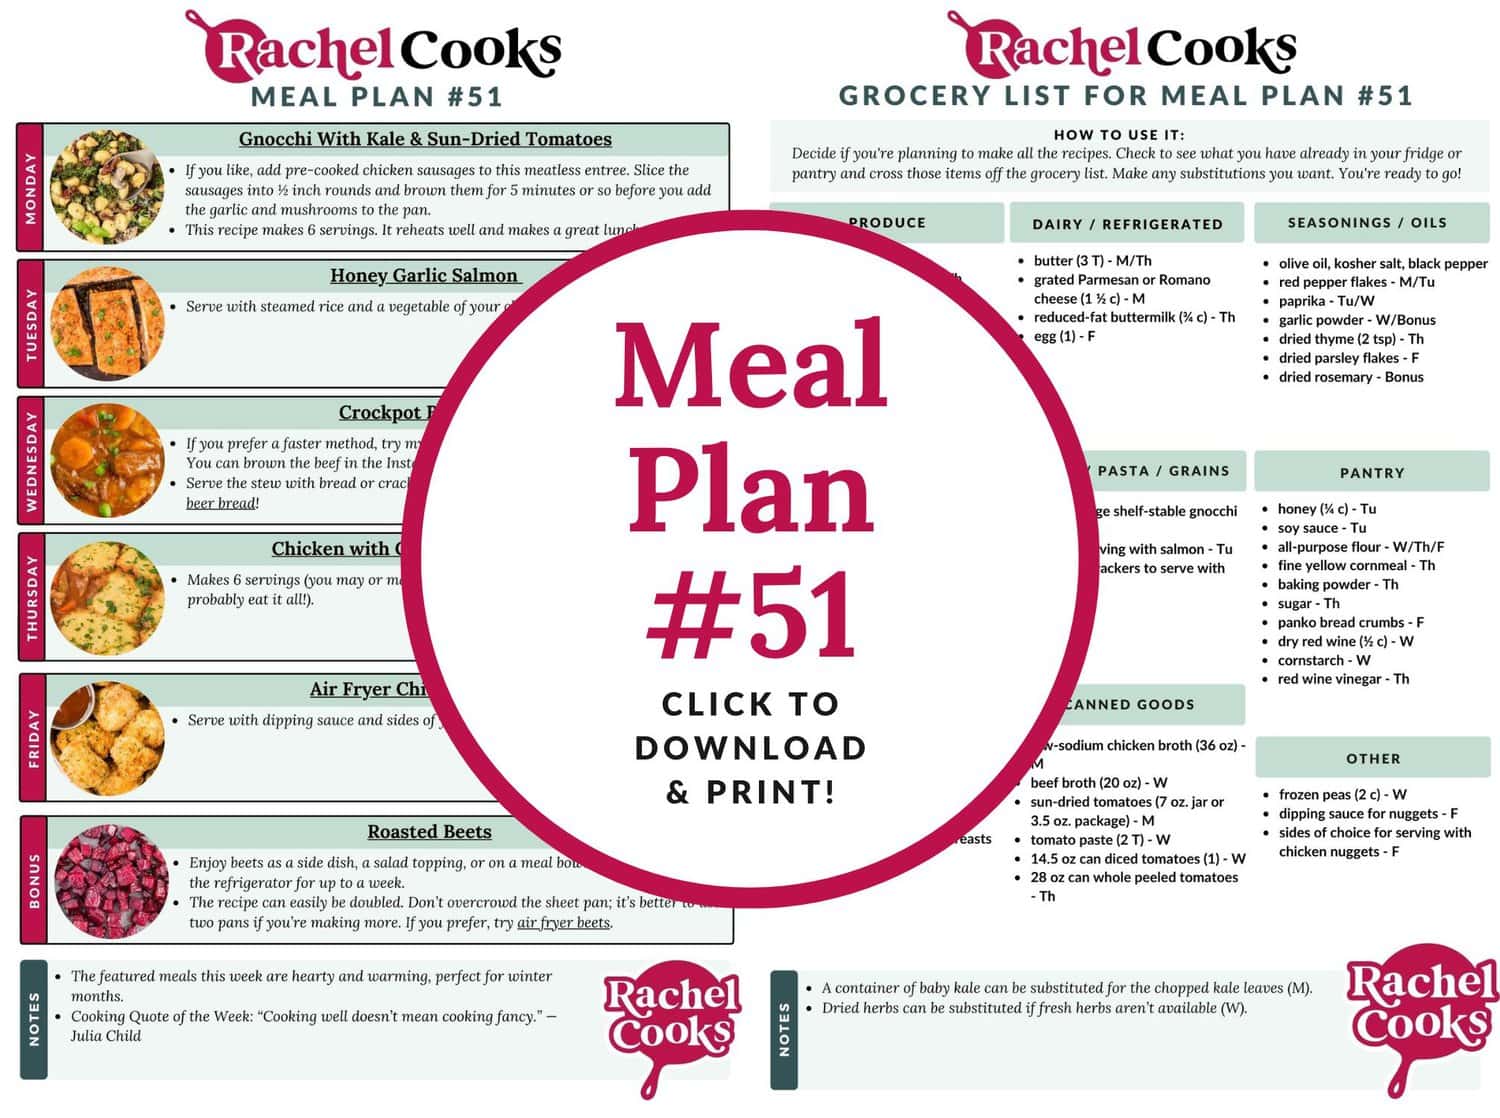 Meal plan 51 preview image showing the printable meal plan.